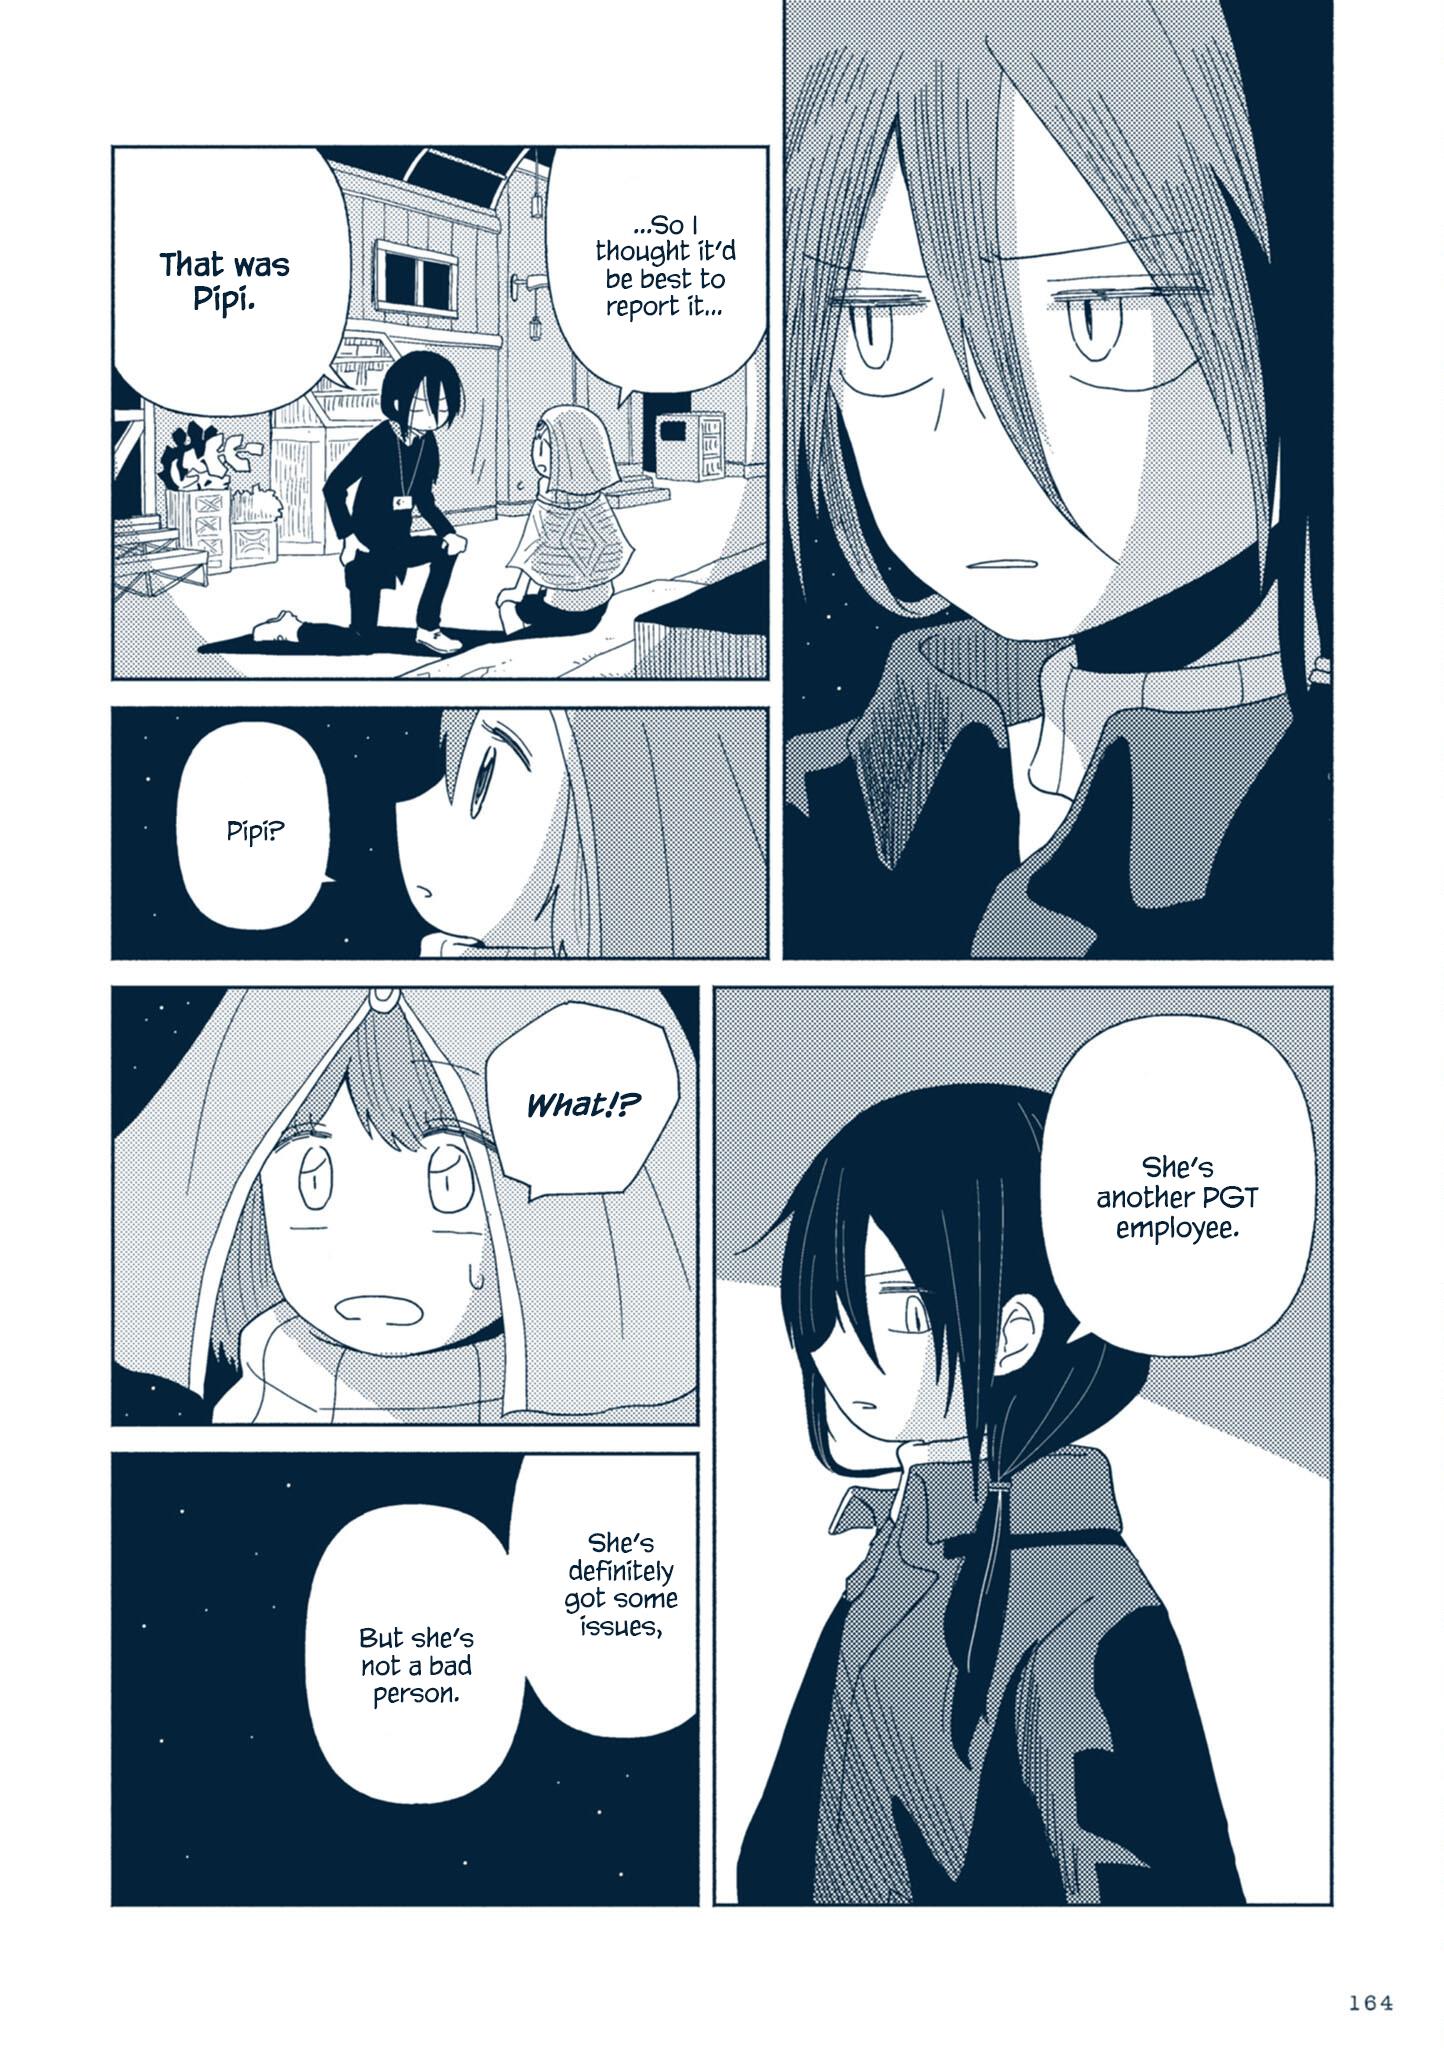 Star Tripper: Planetarium Ghost Travel Vol.1 Chapter 4.5: Slumbering Hotel (Part Two) - Picture 1